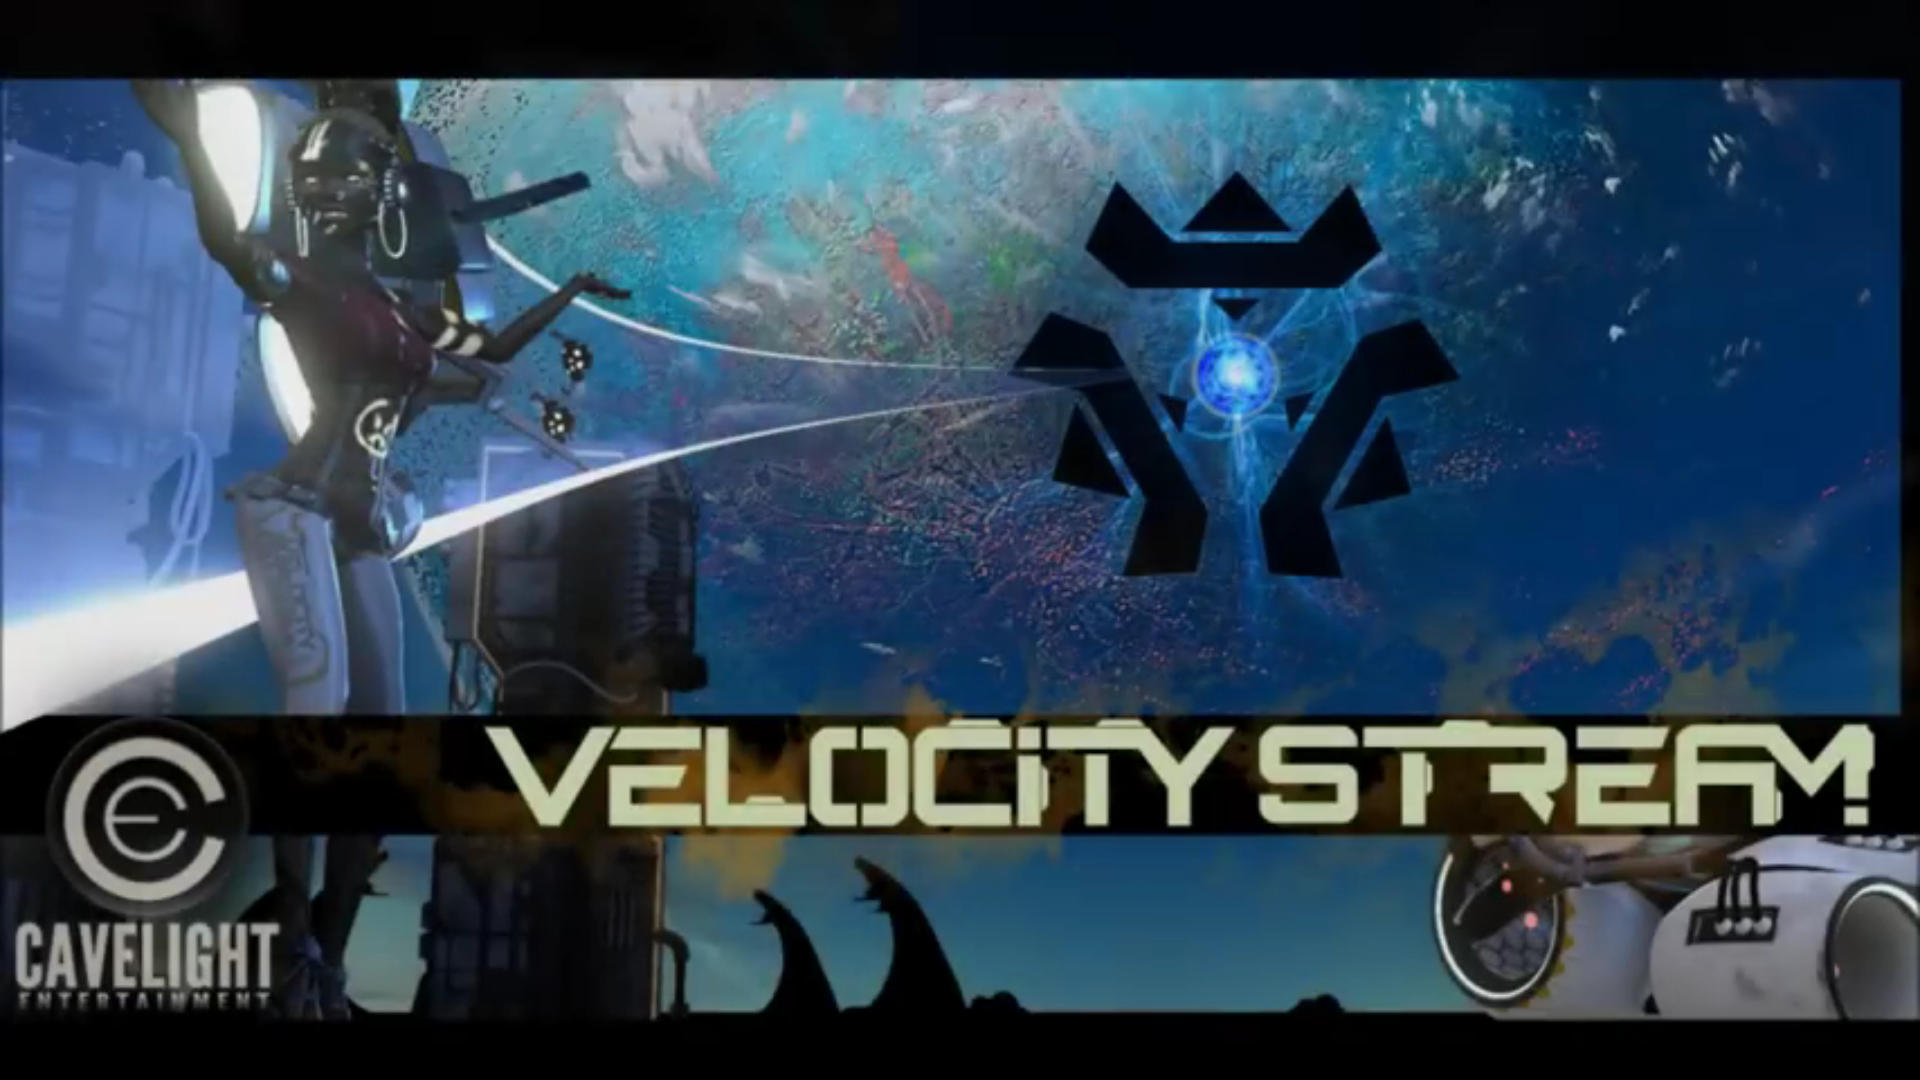 Velocity Stream Demo Coming To Wii U This Spring